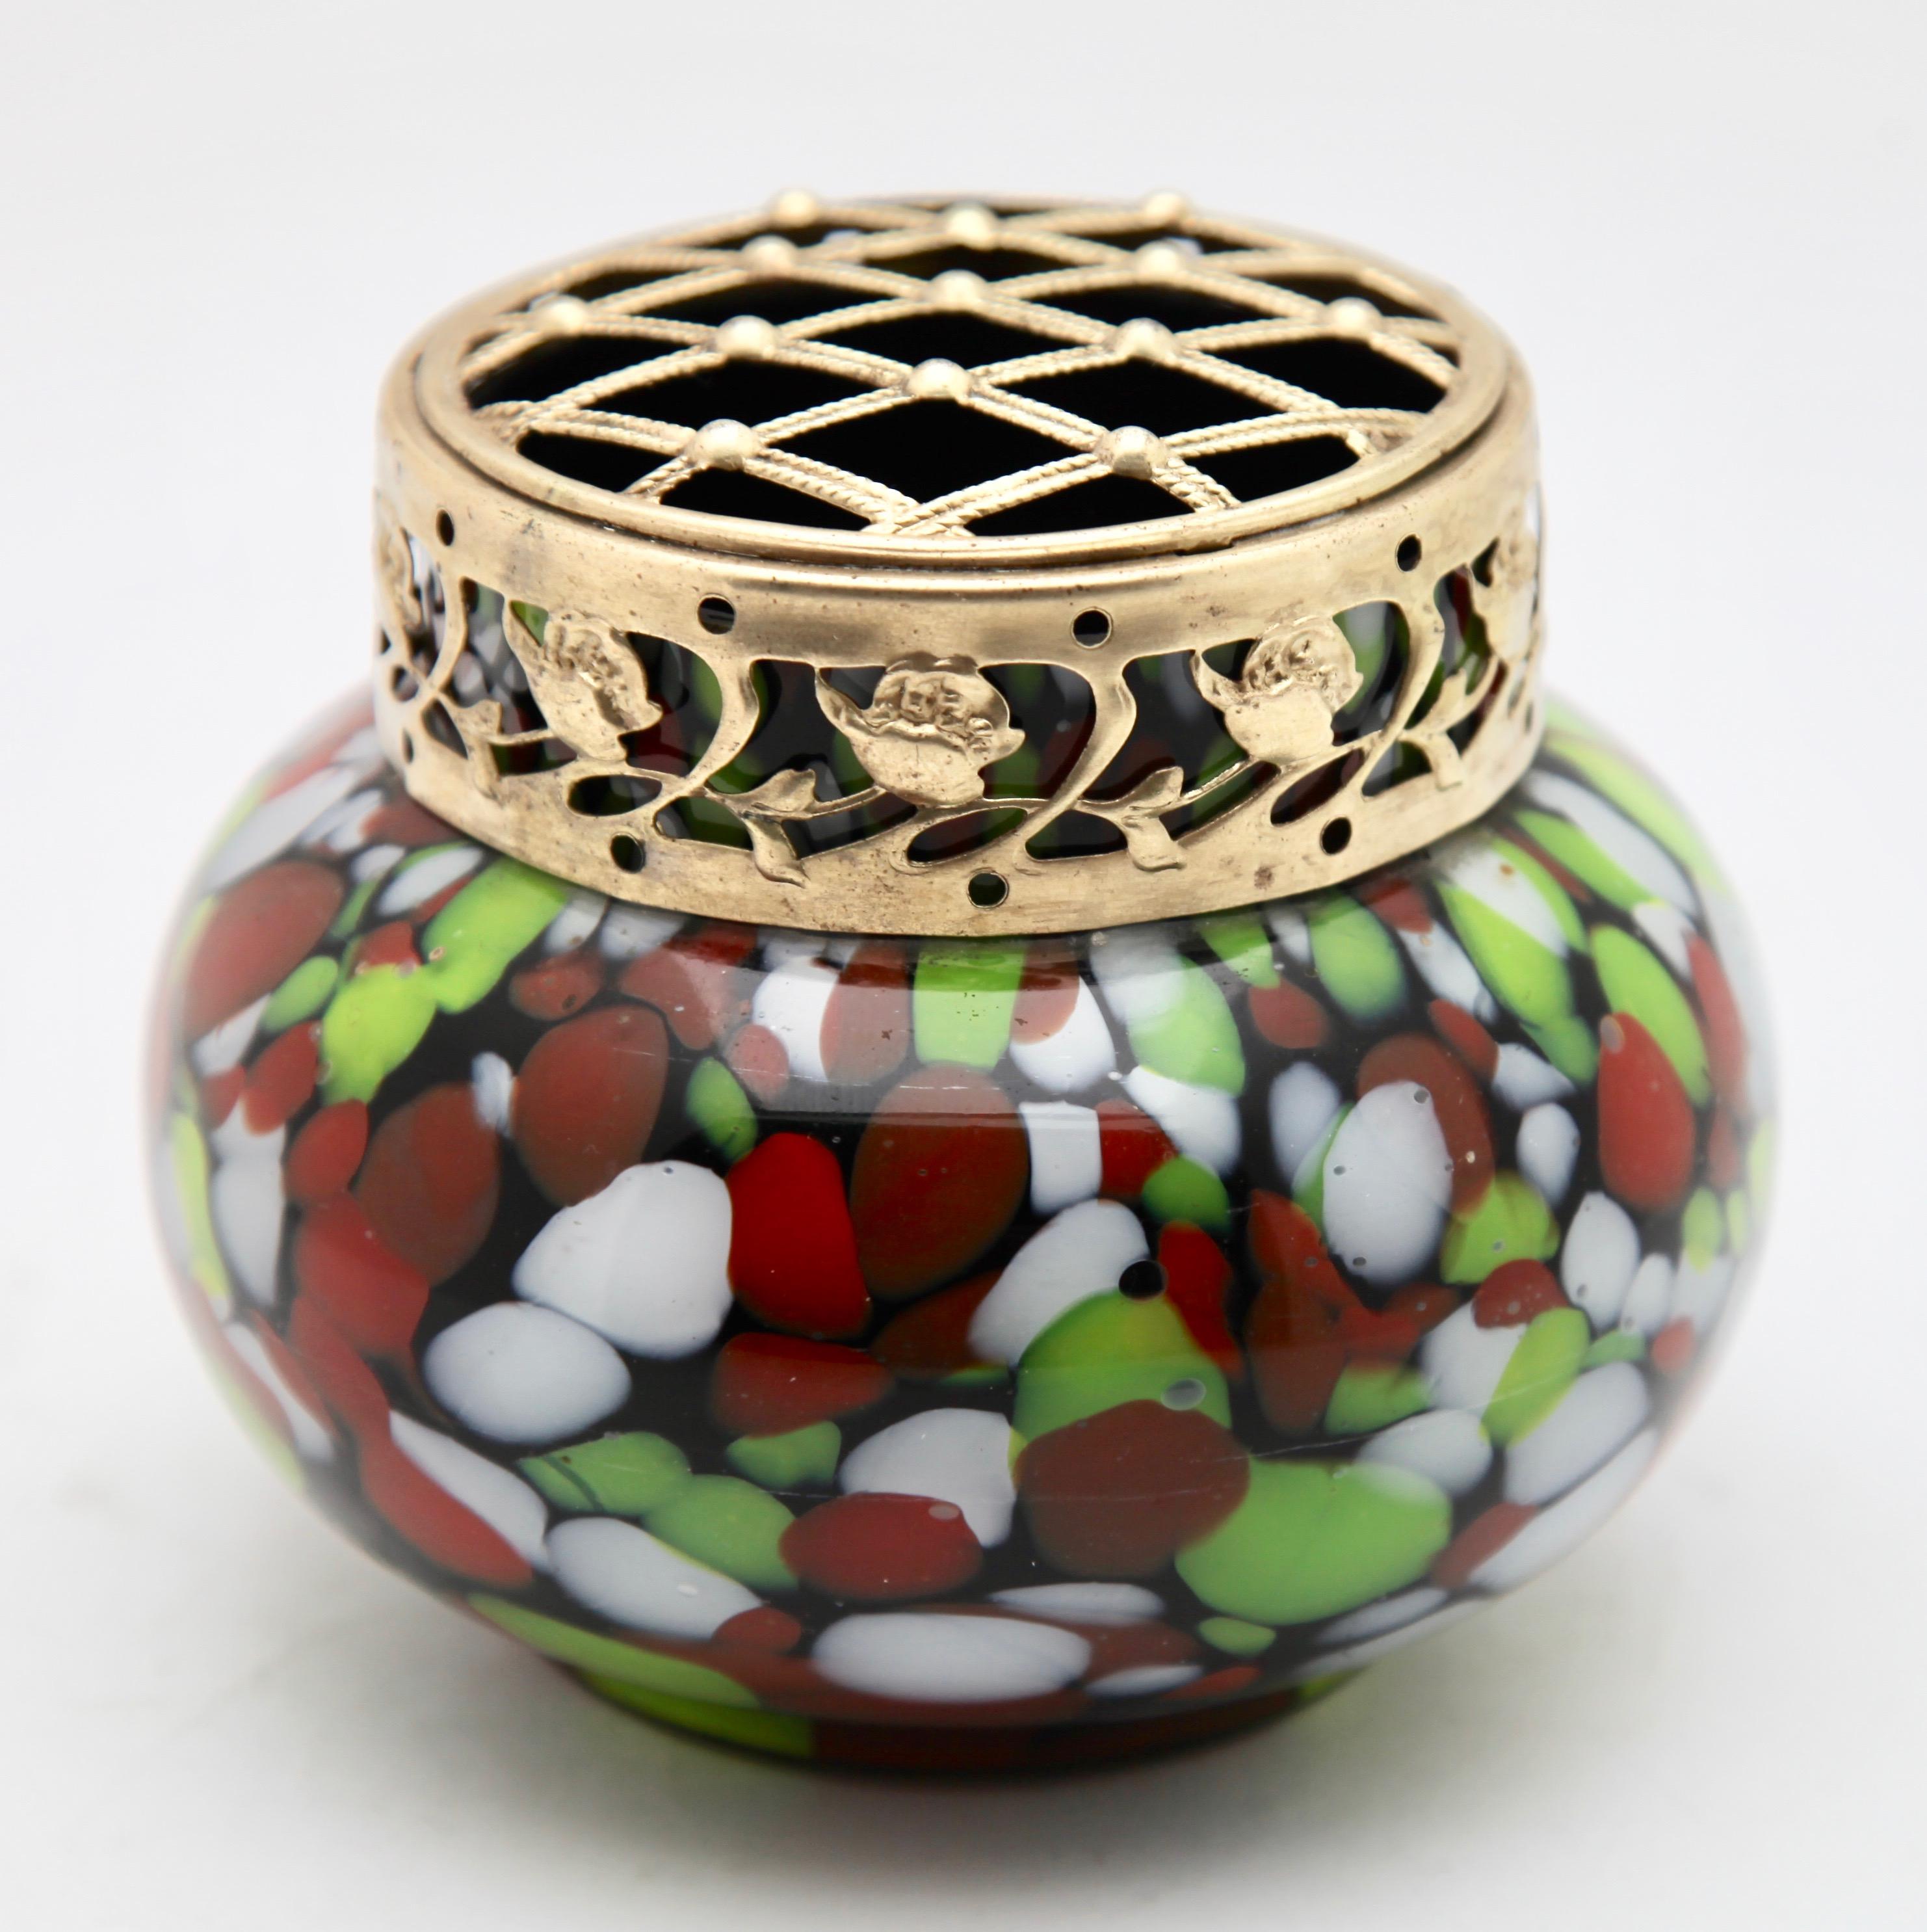 Hand-Crafted 'Pique Fleurs' Vase in Red, White, Green Splatter Colors, with Grille For Sale